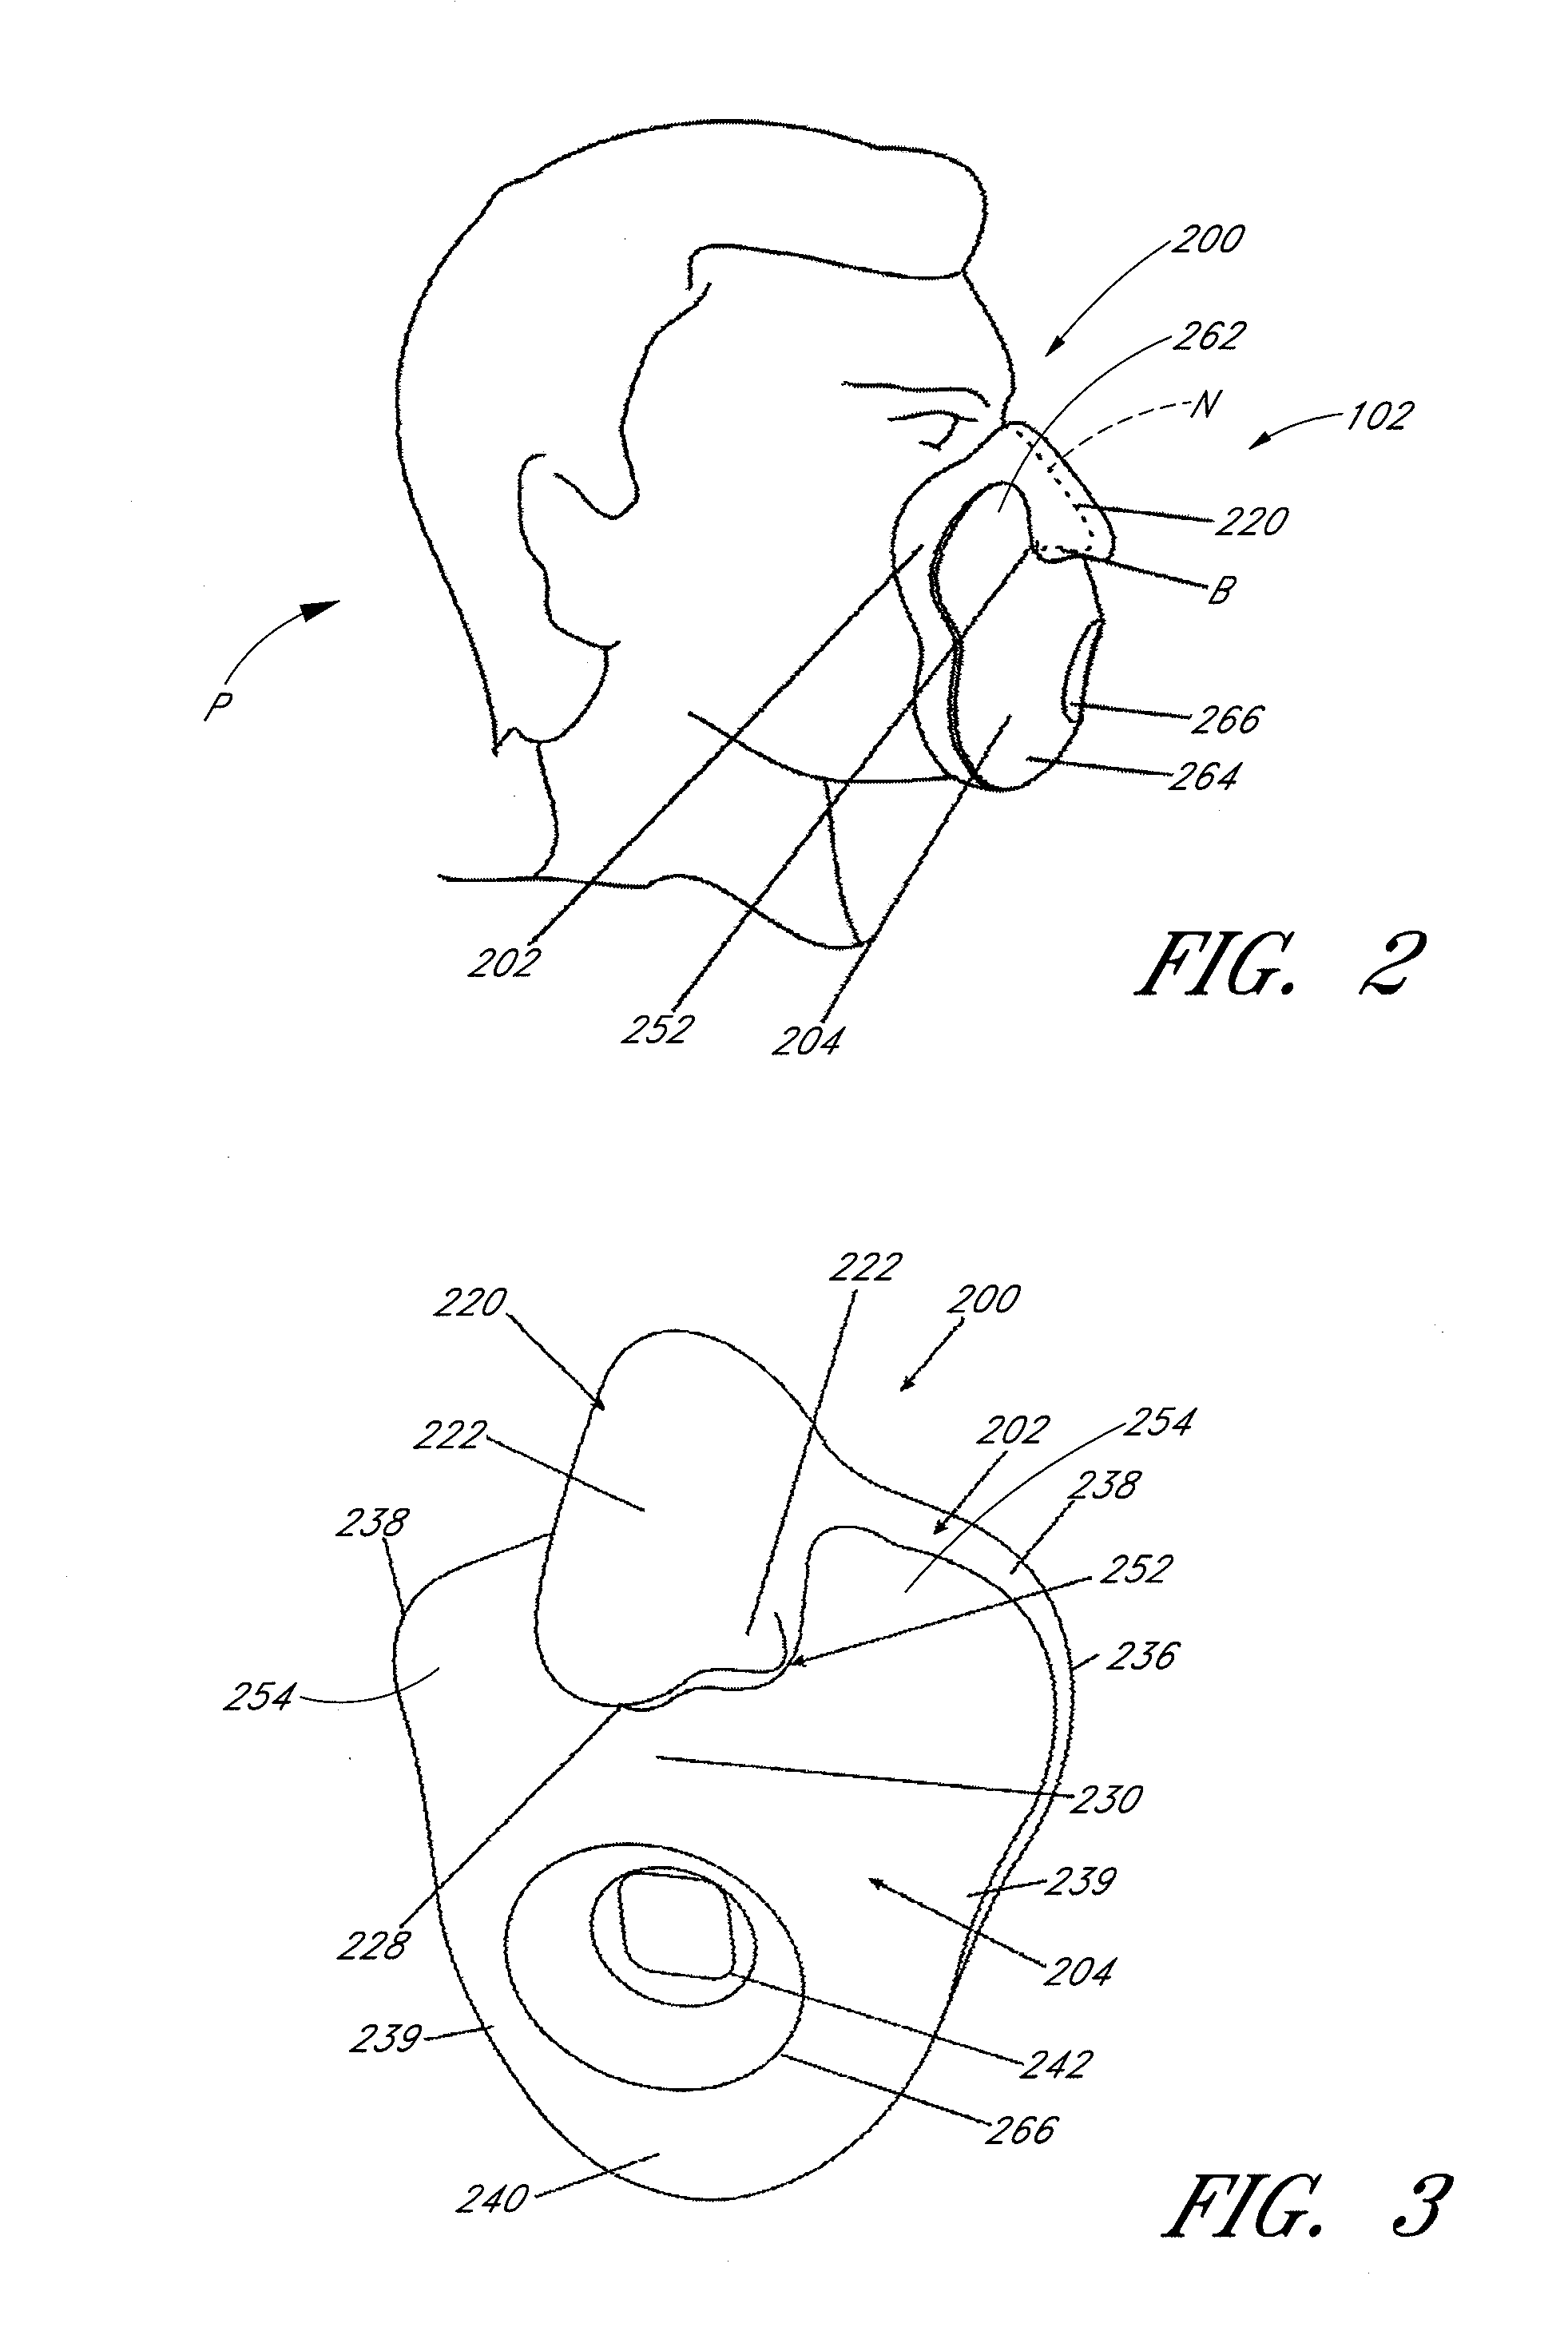 Patient interface and headgear